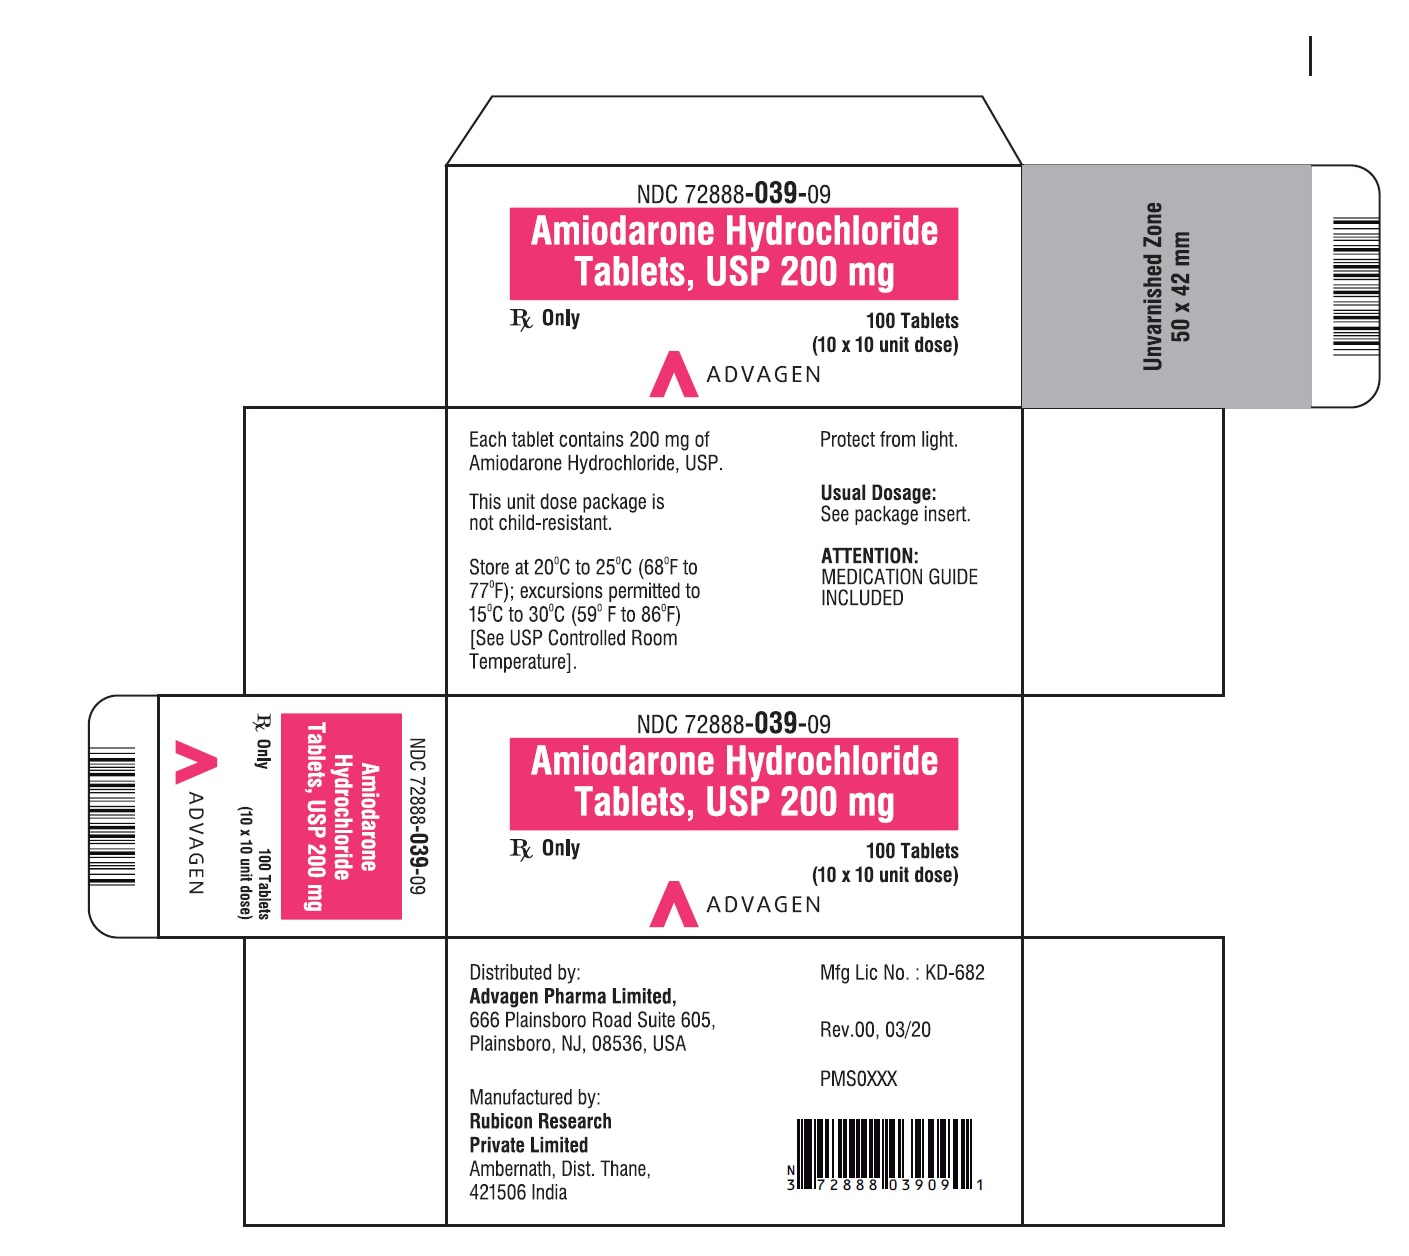 Amiodarone HCL Tablets,USP 200 mg - NDC 72888-039-09 - Carton of 100 (10 x 10) Unit dose blisters